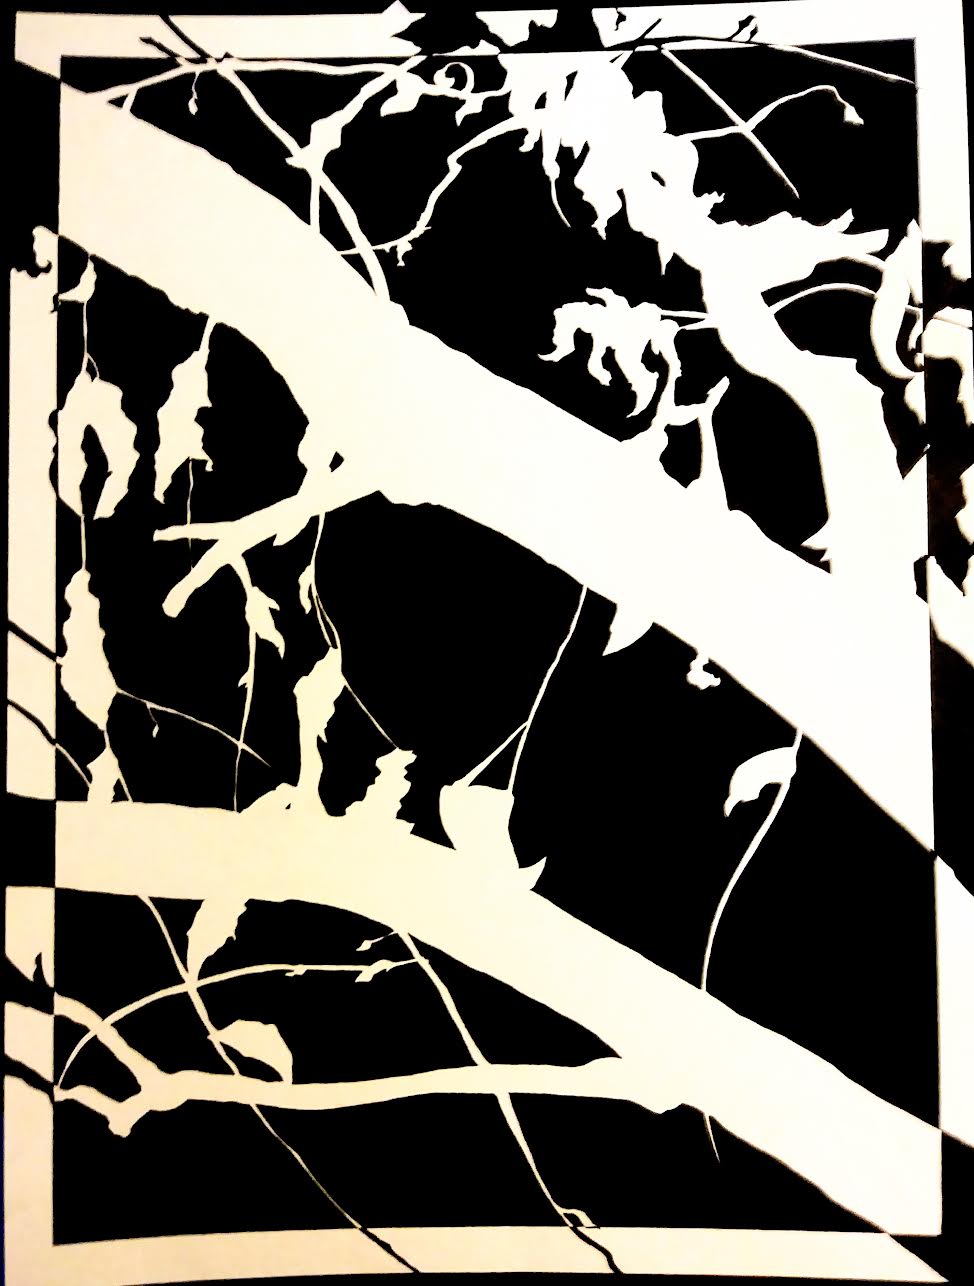 An abstract black and white piece of art that resembles the reverse silhouette (white branches, black background) of a tree.